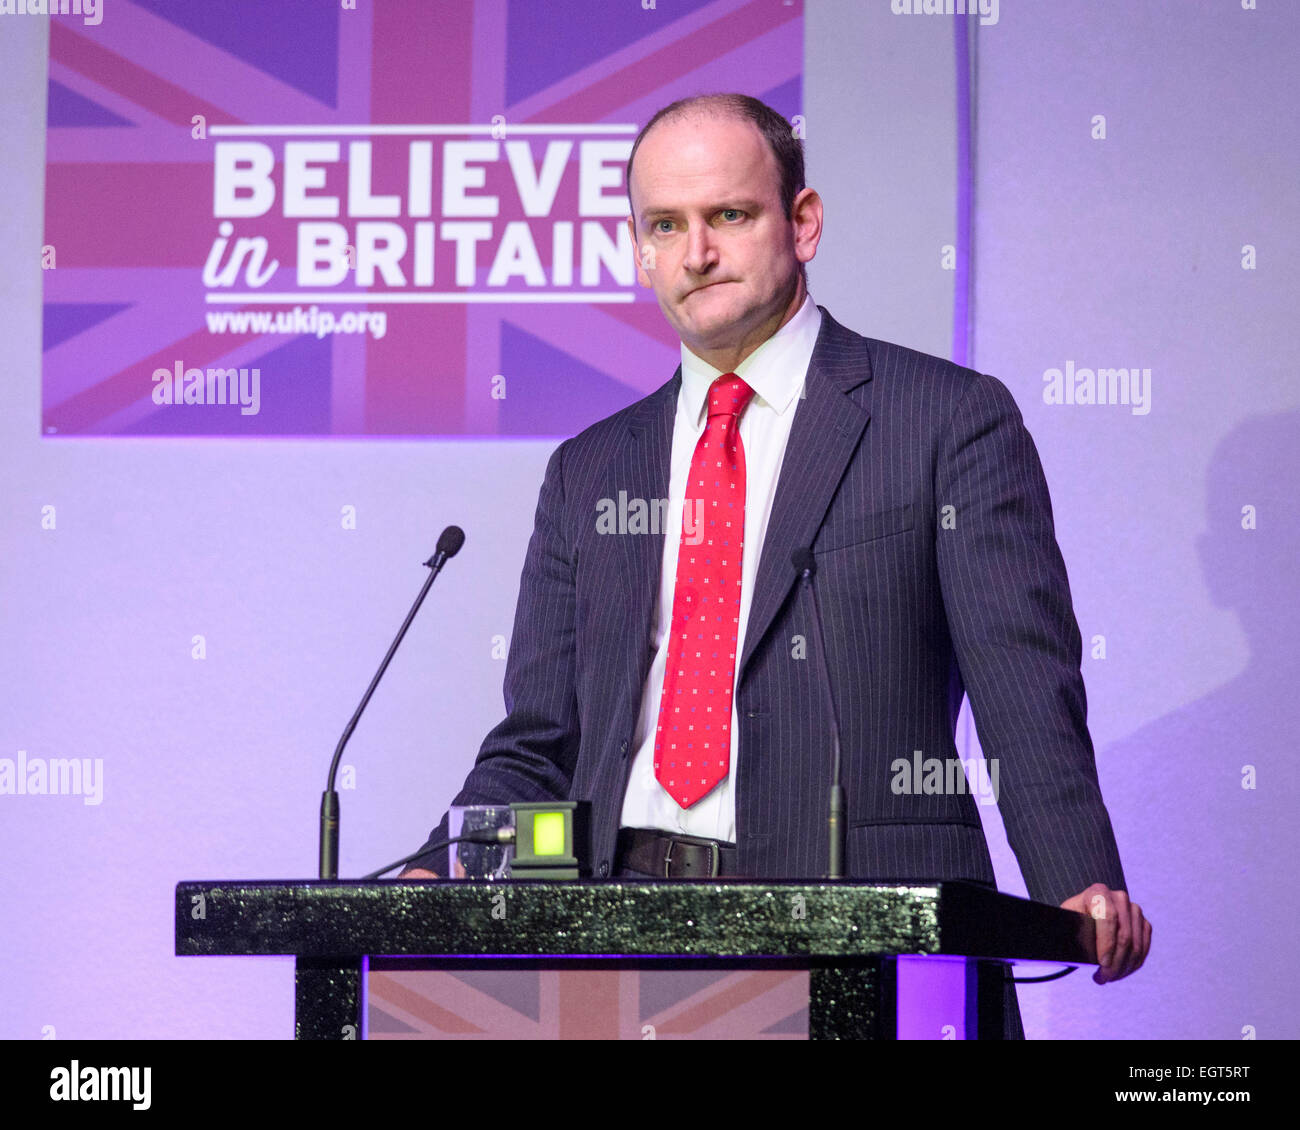 UKIP SPRING CONFERENCE on 28/02/2015 at Winter Gardens, Margate. Douglas Carswell, UKIP MP and PPC for Clacton-on-Sea, addresses the conference. Picture by Julie Edwards Stock Photo